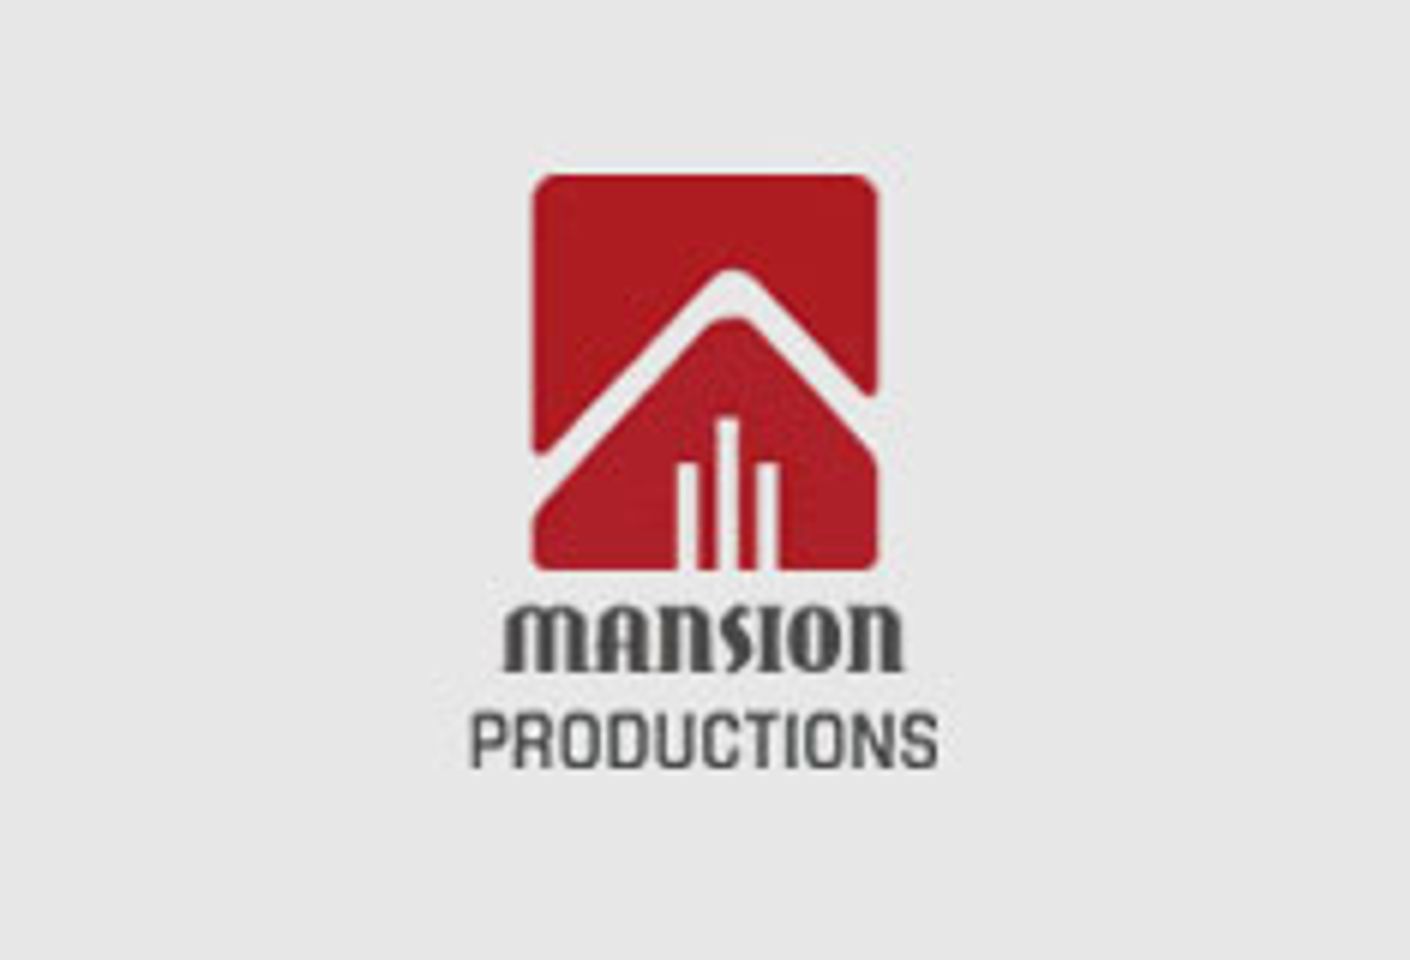 Mansion Productions Acquires MPA3.com